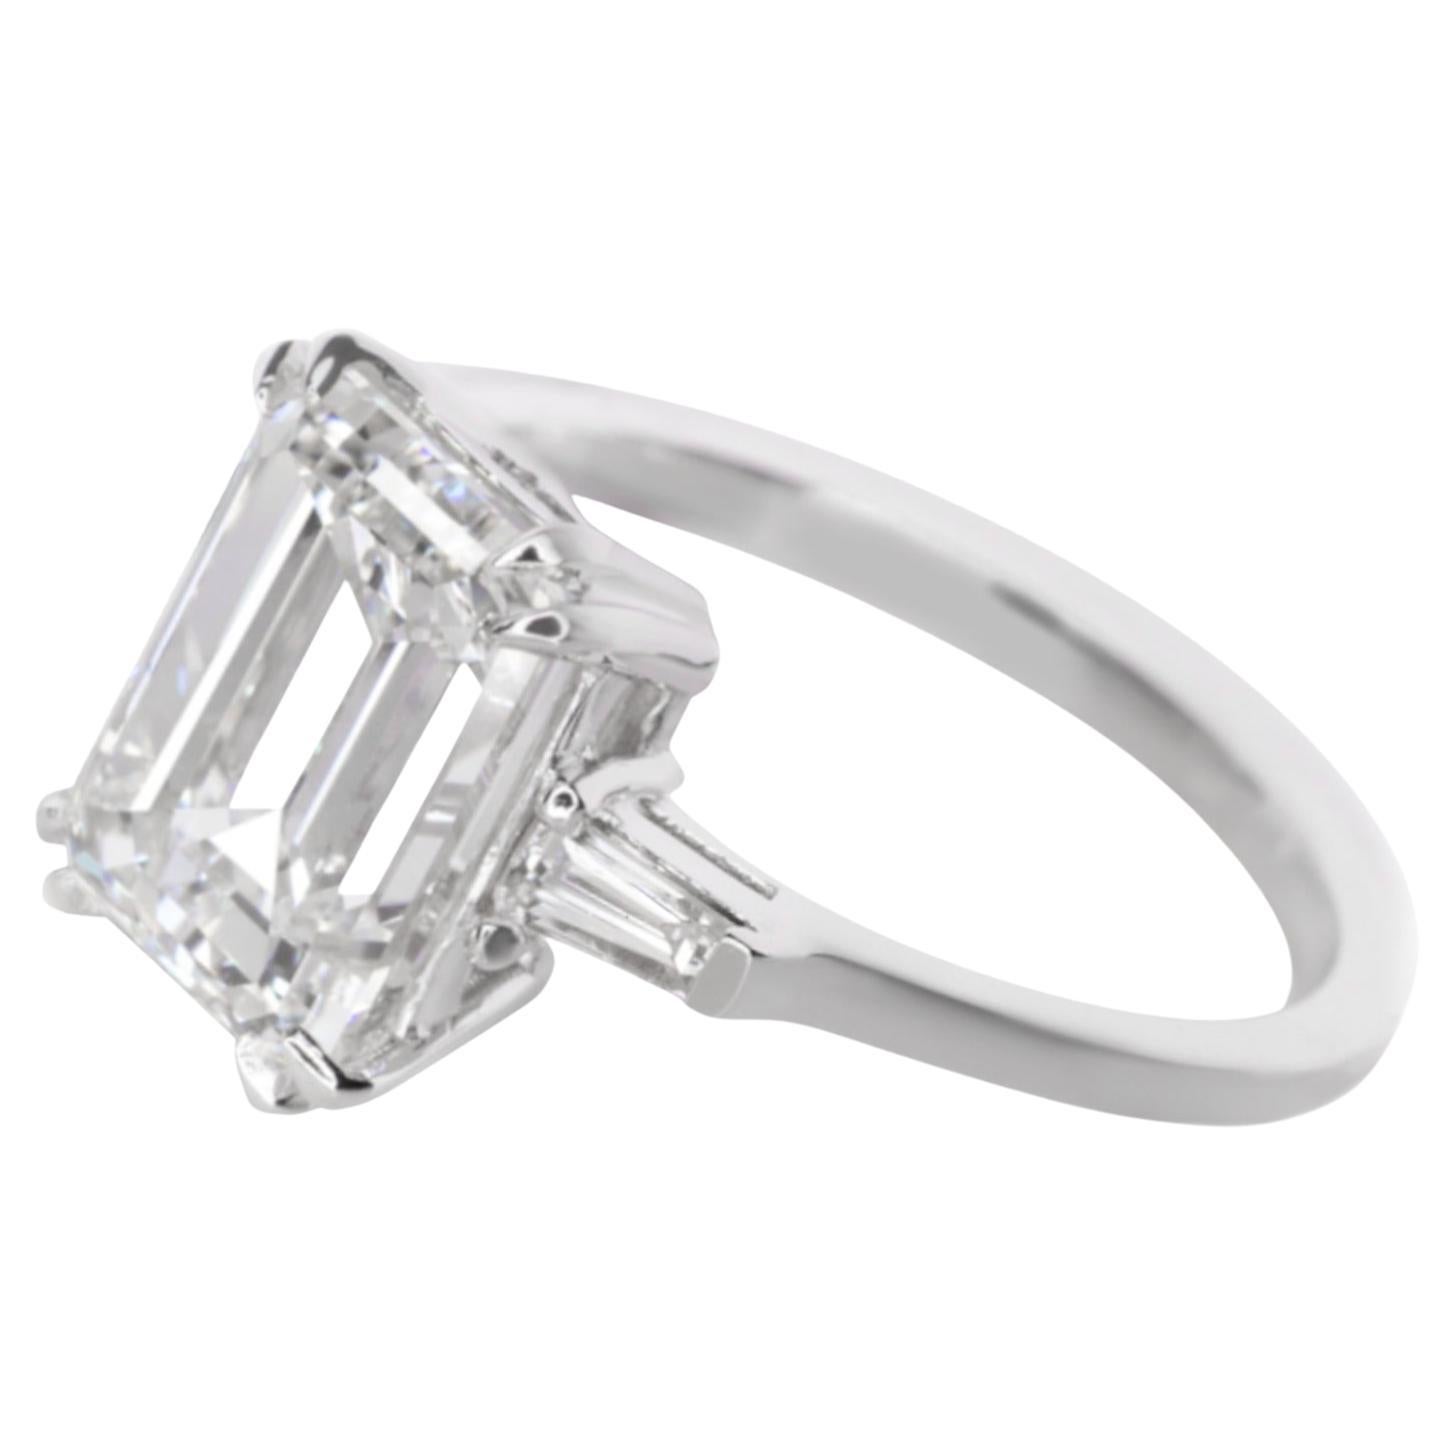 We personally hand picked this breathtaking GIA certified 3 carat natural diamond GIA certified Emerald cut diamond 
This piece was Hand made in Italy in 18 carats white gold
All pieces are hand made in Italy an send to our American warehouse for